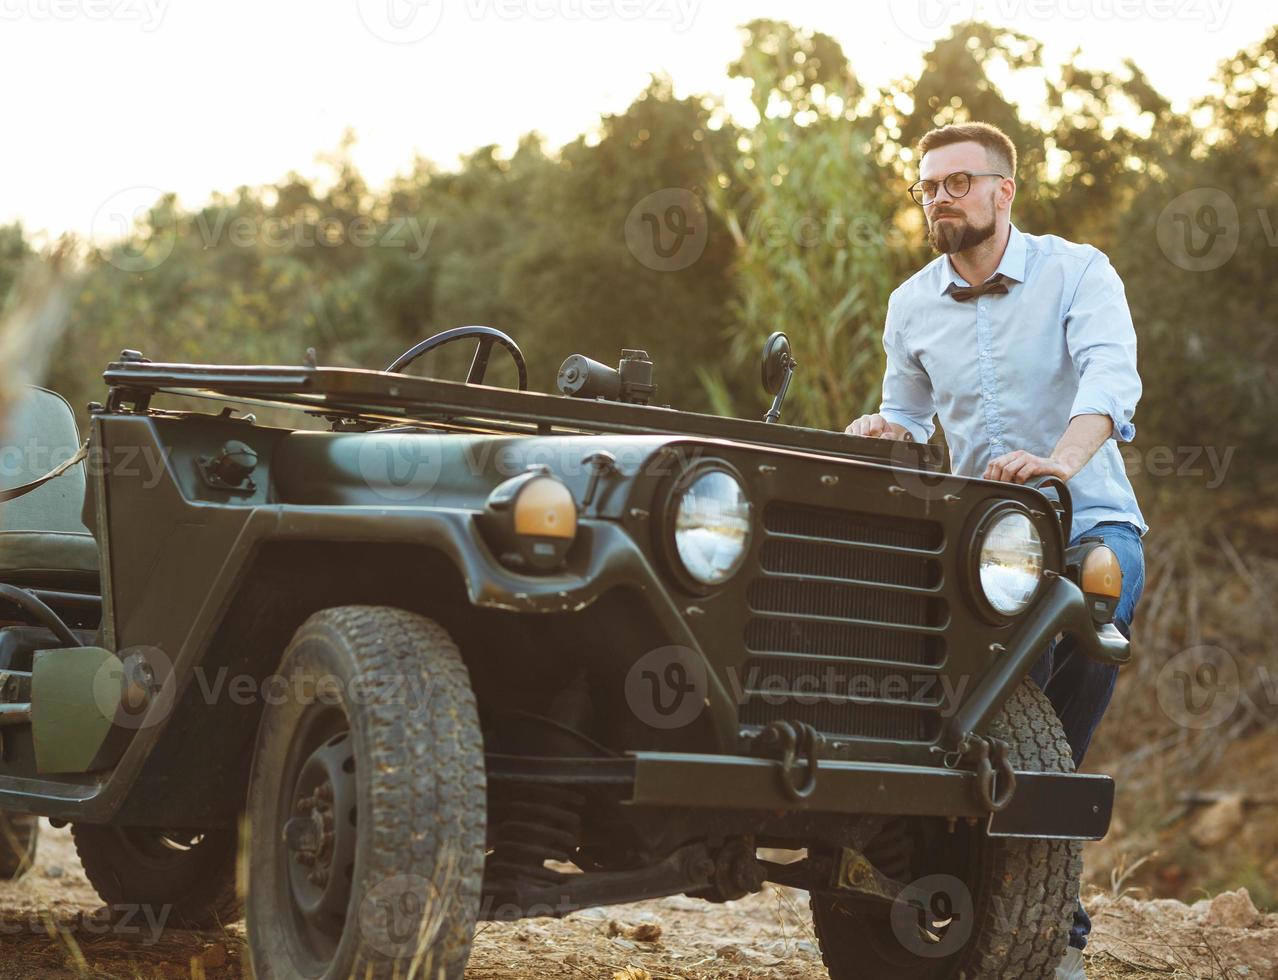 Young stylish man with glasses and bow tie near the old-fashioned SUV photo